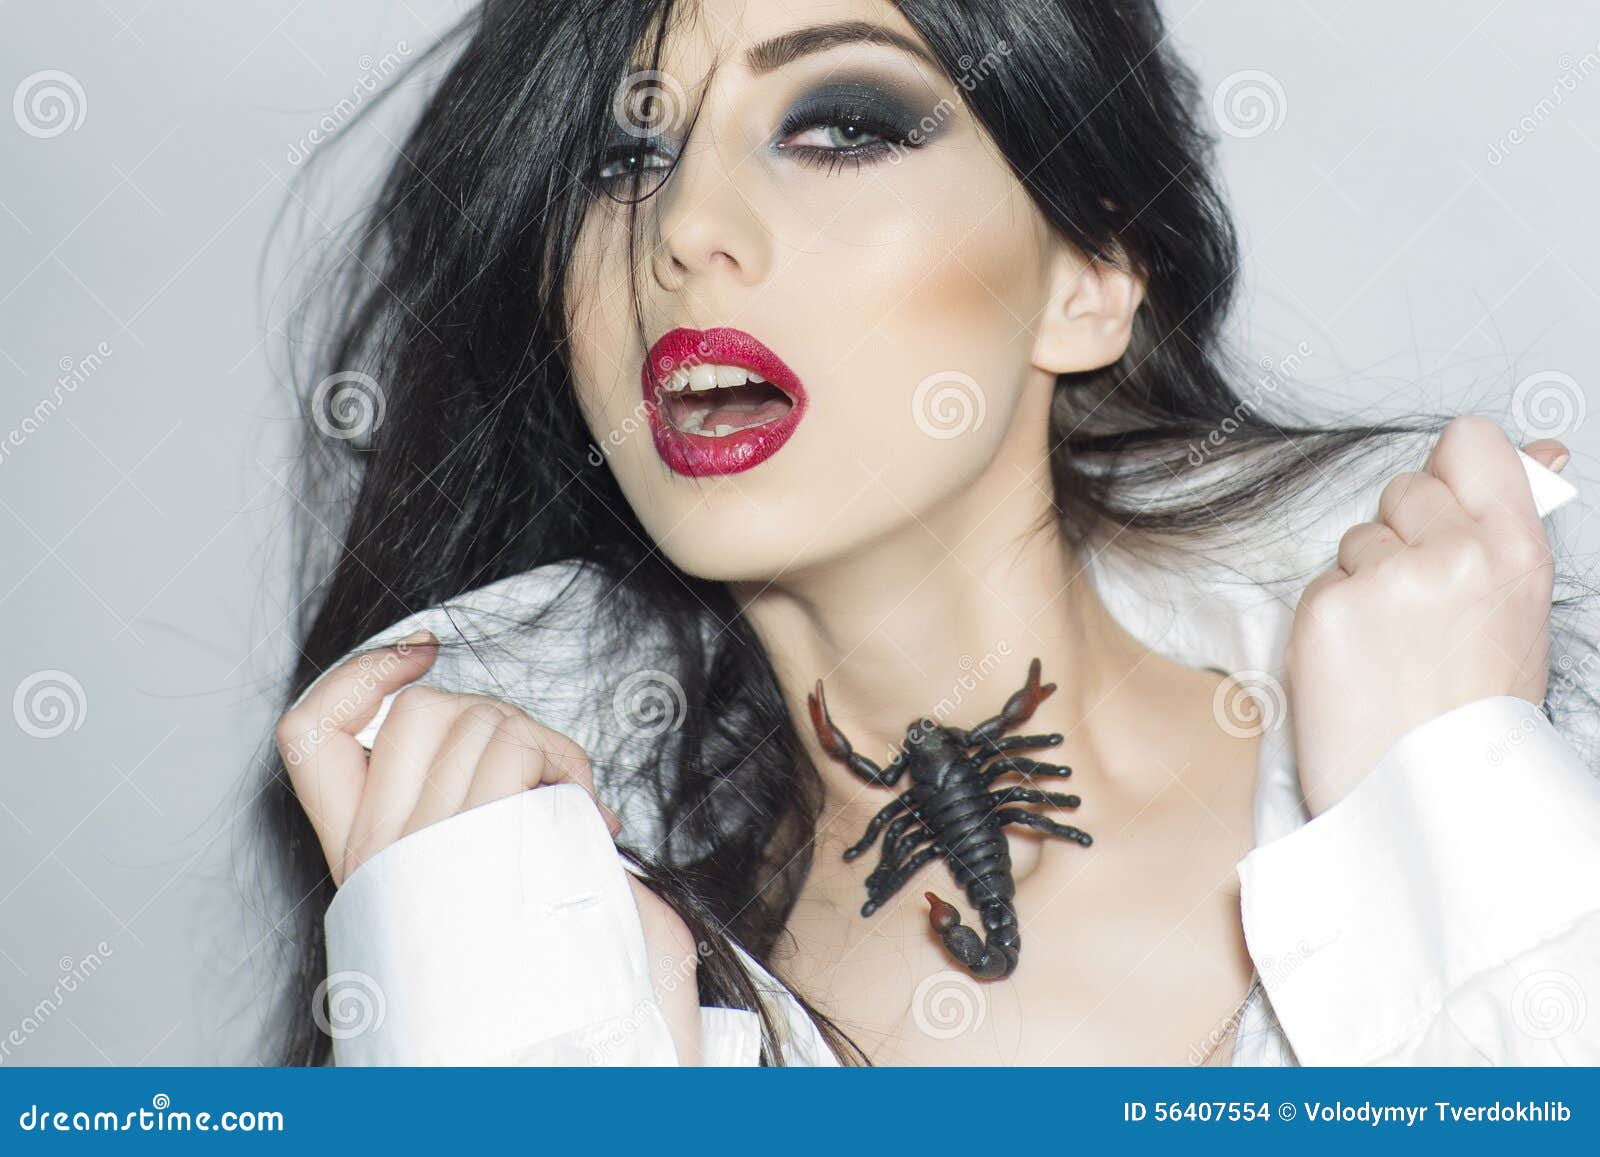 udobnost, izazov - Page 16 Tempting-girl-scorpion-portrait-young-brunette-bright-makeup-red-lips-white-blouse-holding-standing-light-grey-56407554